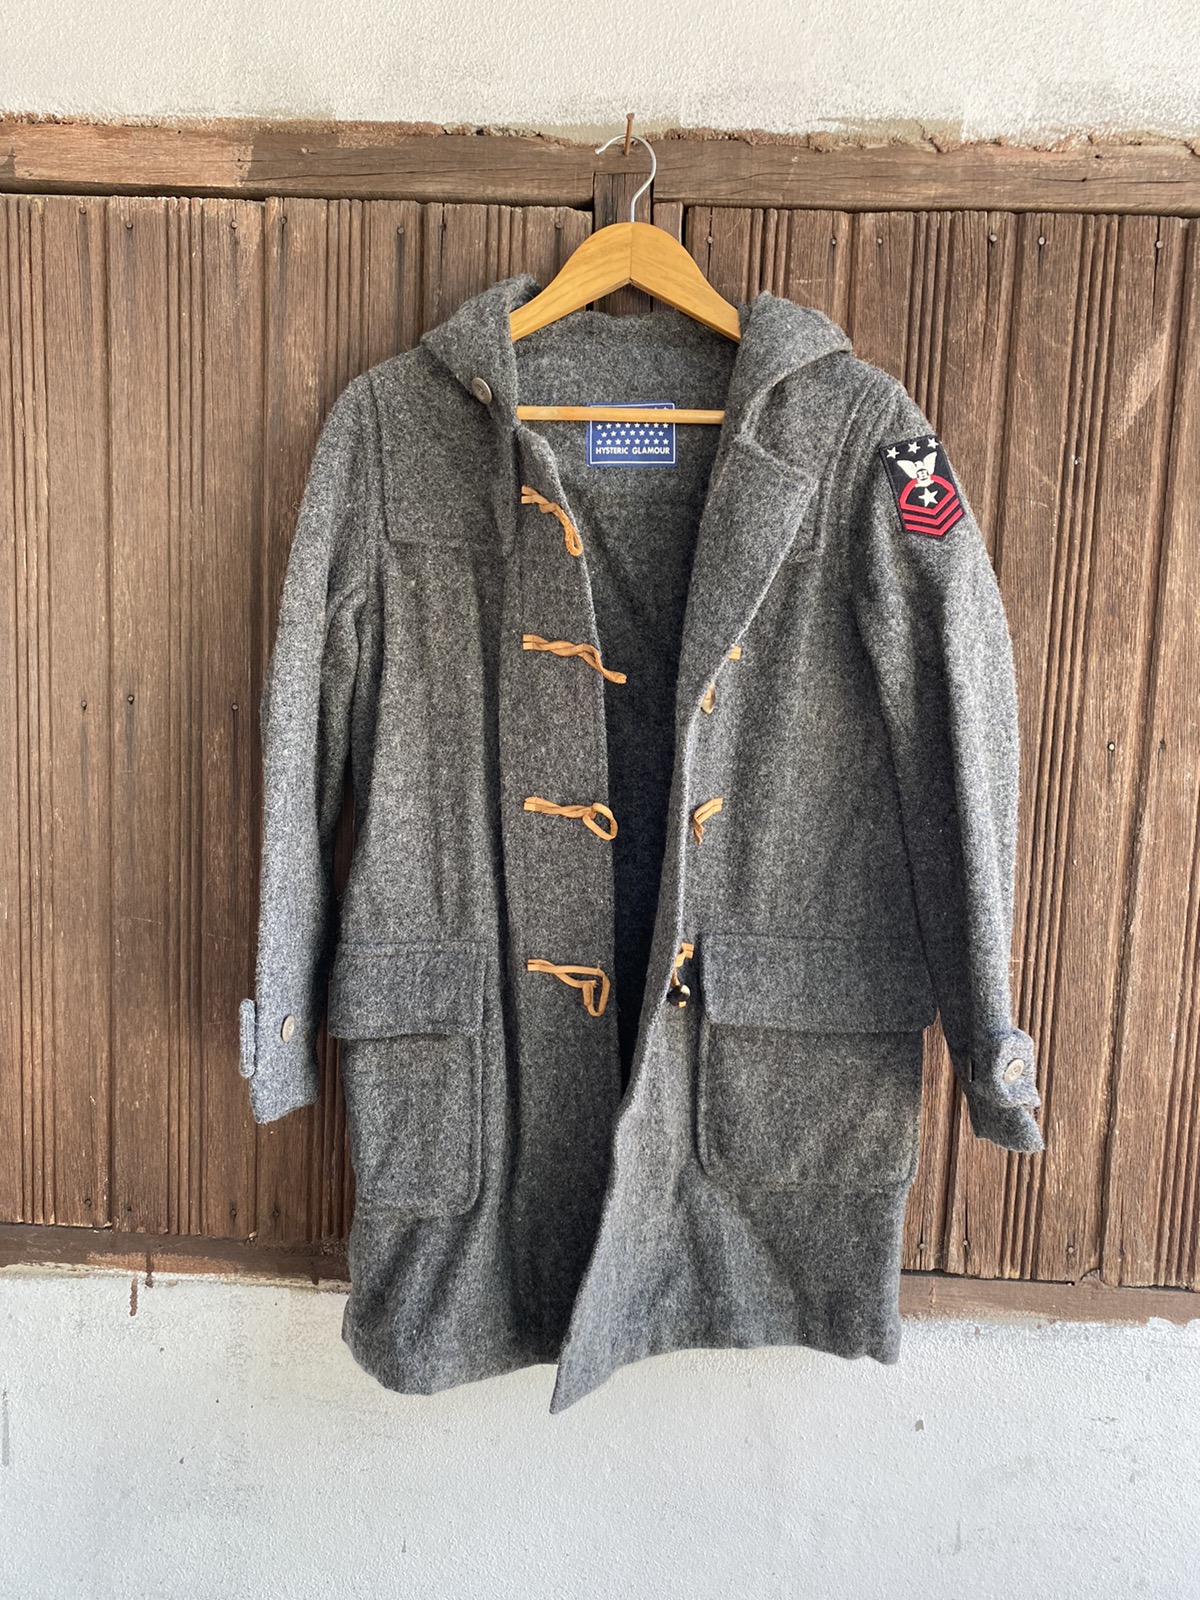 Vintage Hysteric Glamour Army Duffel Coat - 3